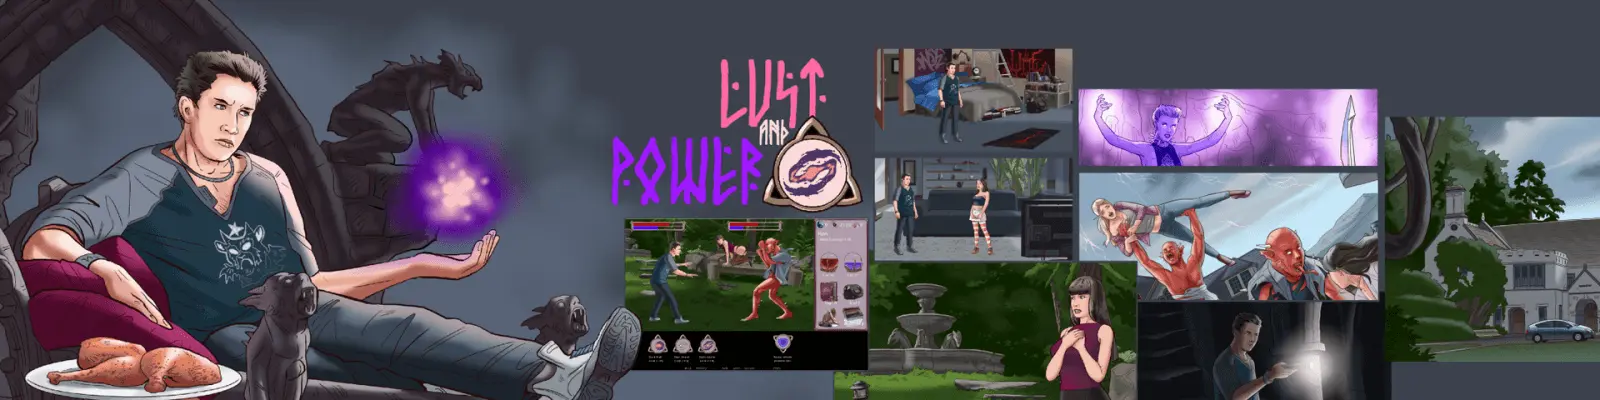 Lust and Power [v0.29a] main image